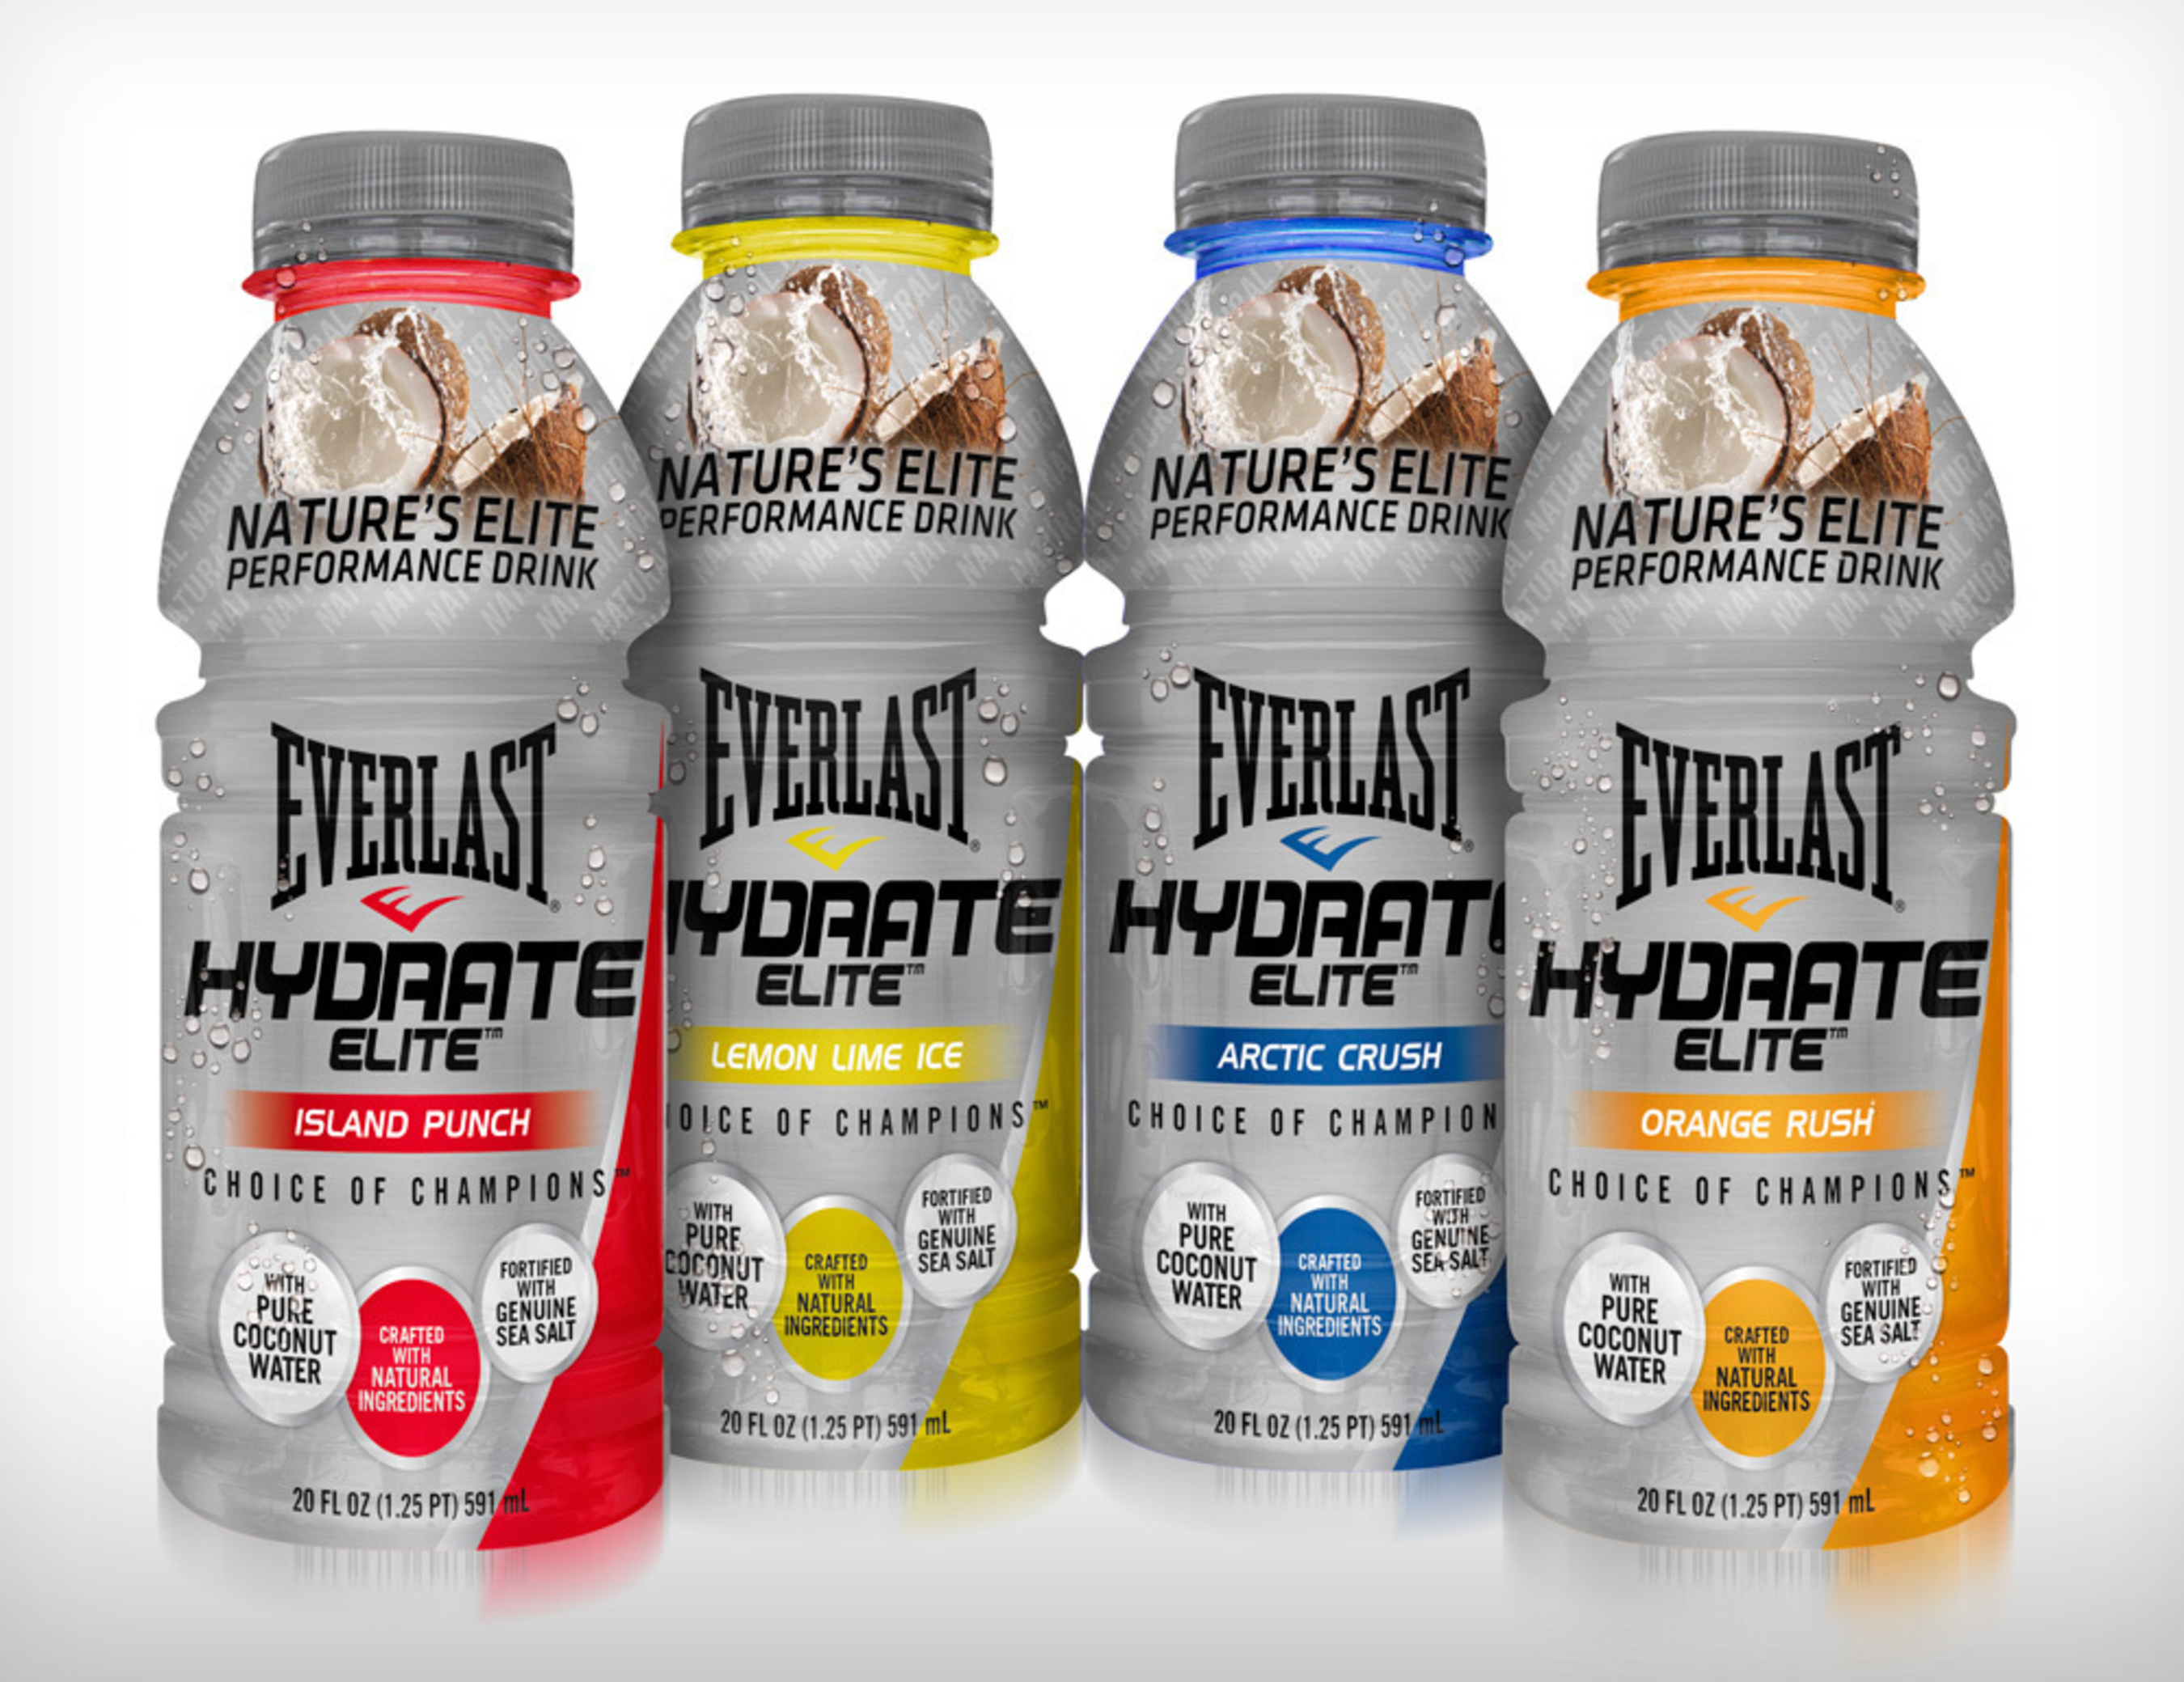 Everlast And Cellutions Launch Everlast Hydrate Elite™ Performance